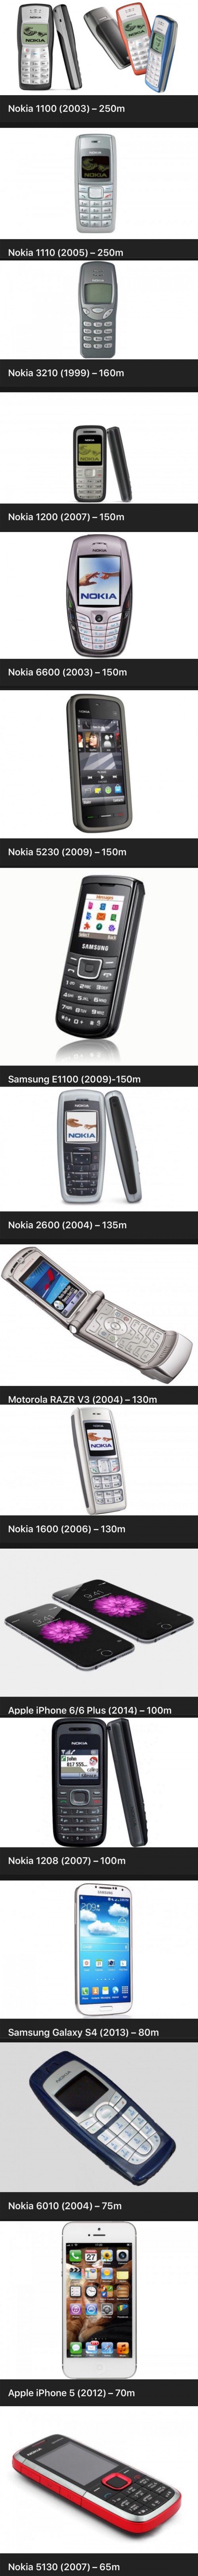 Best selling mobiles ever